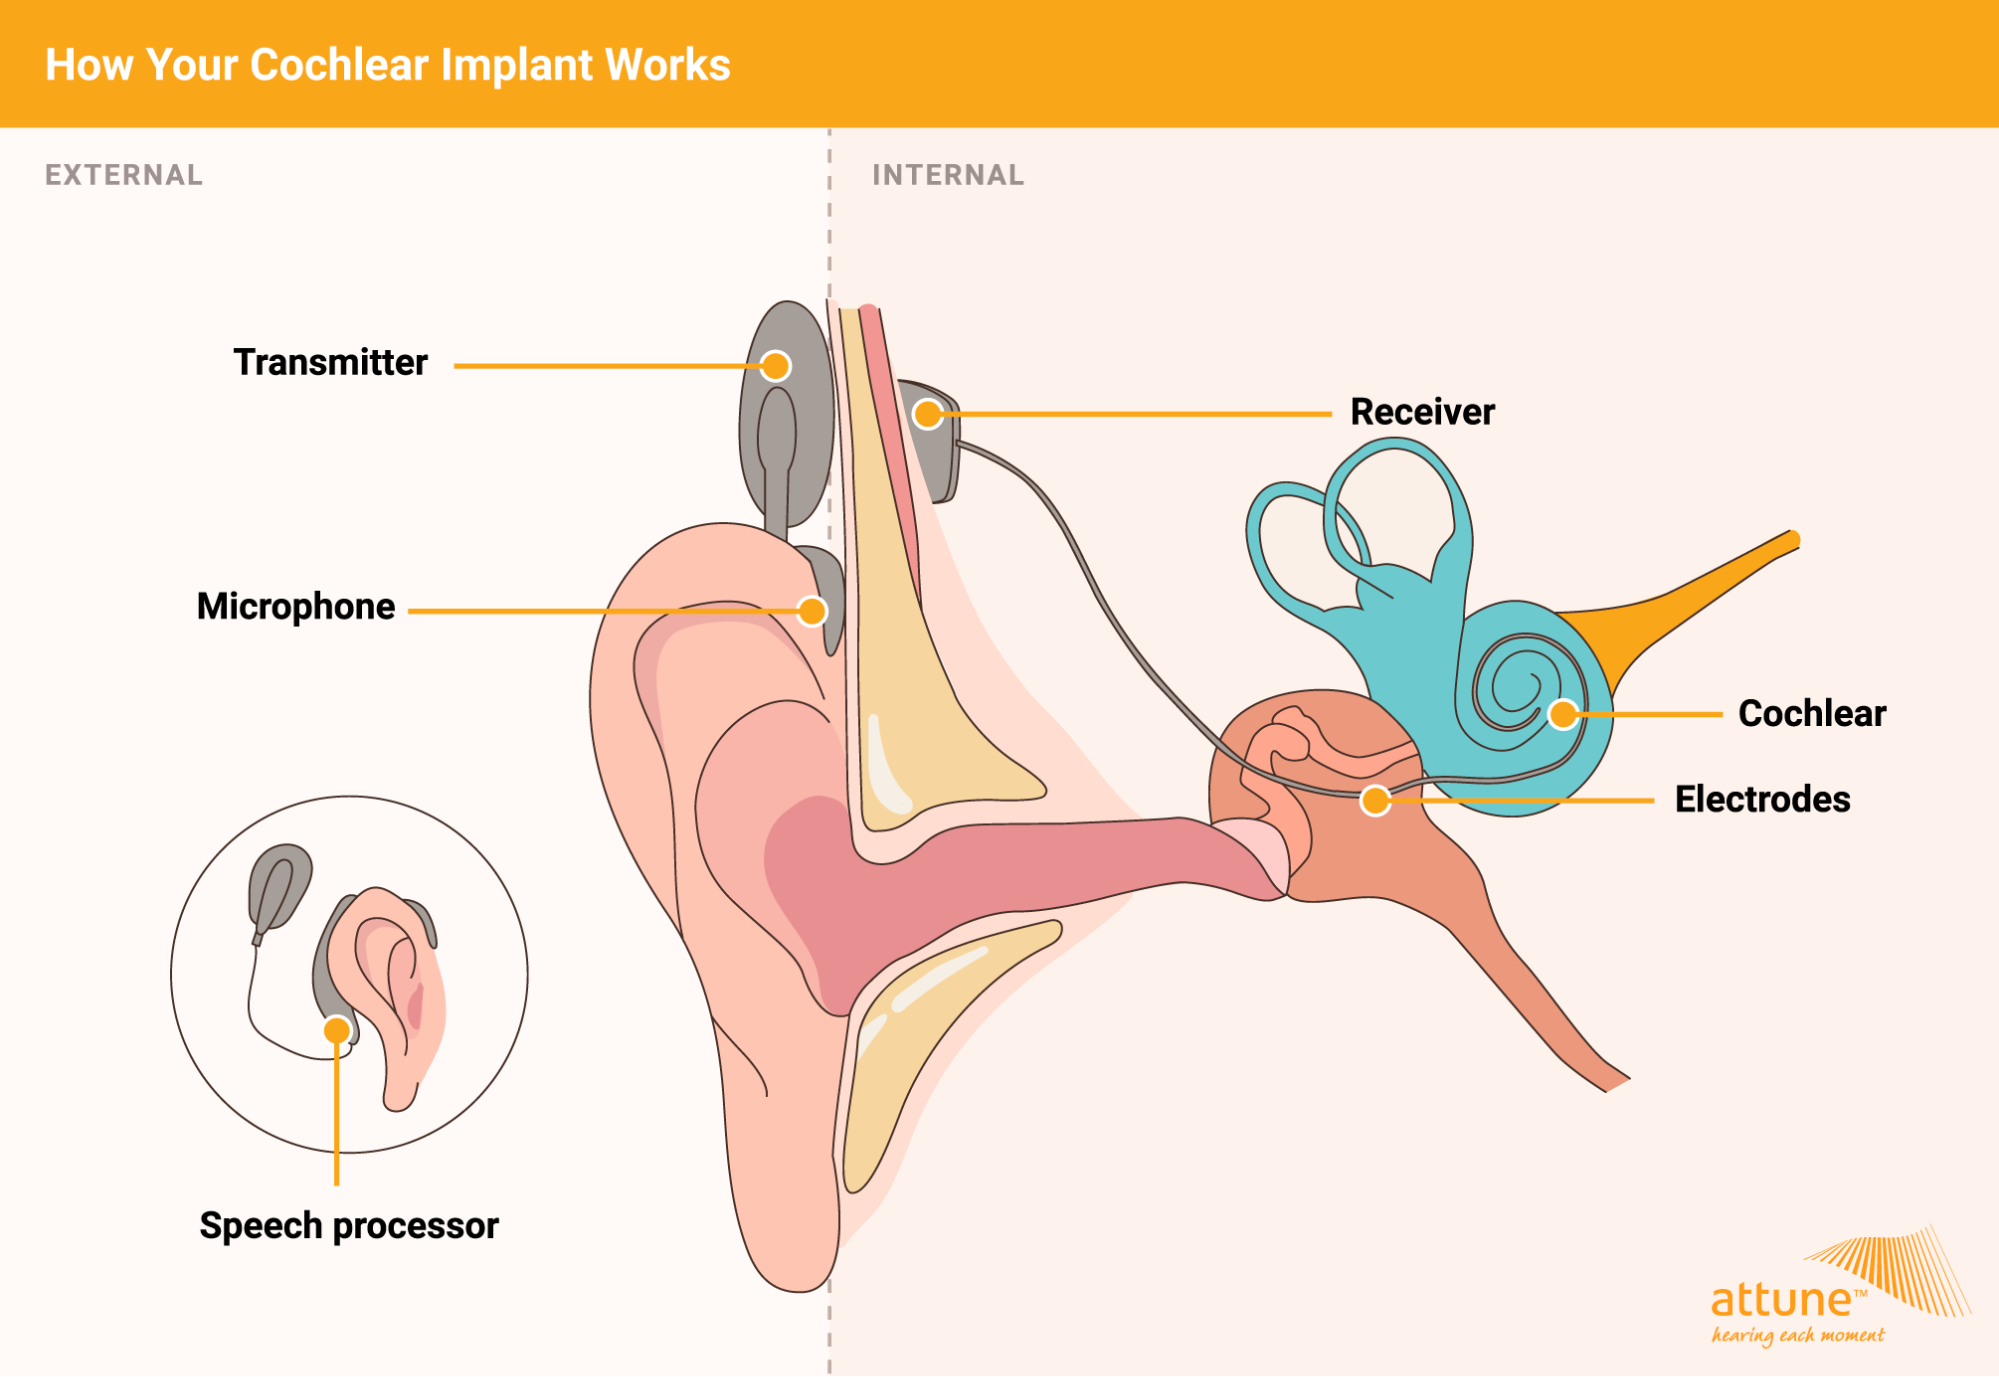 Cochlear implants